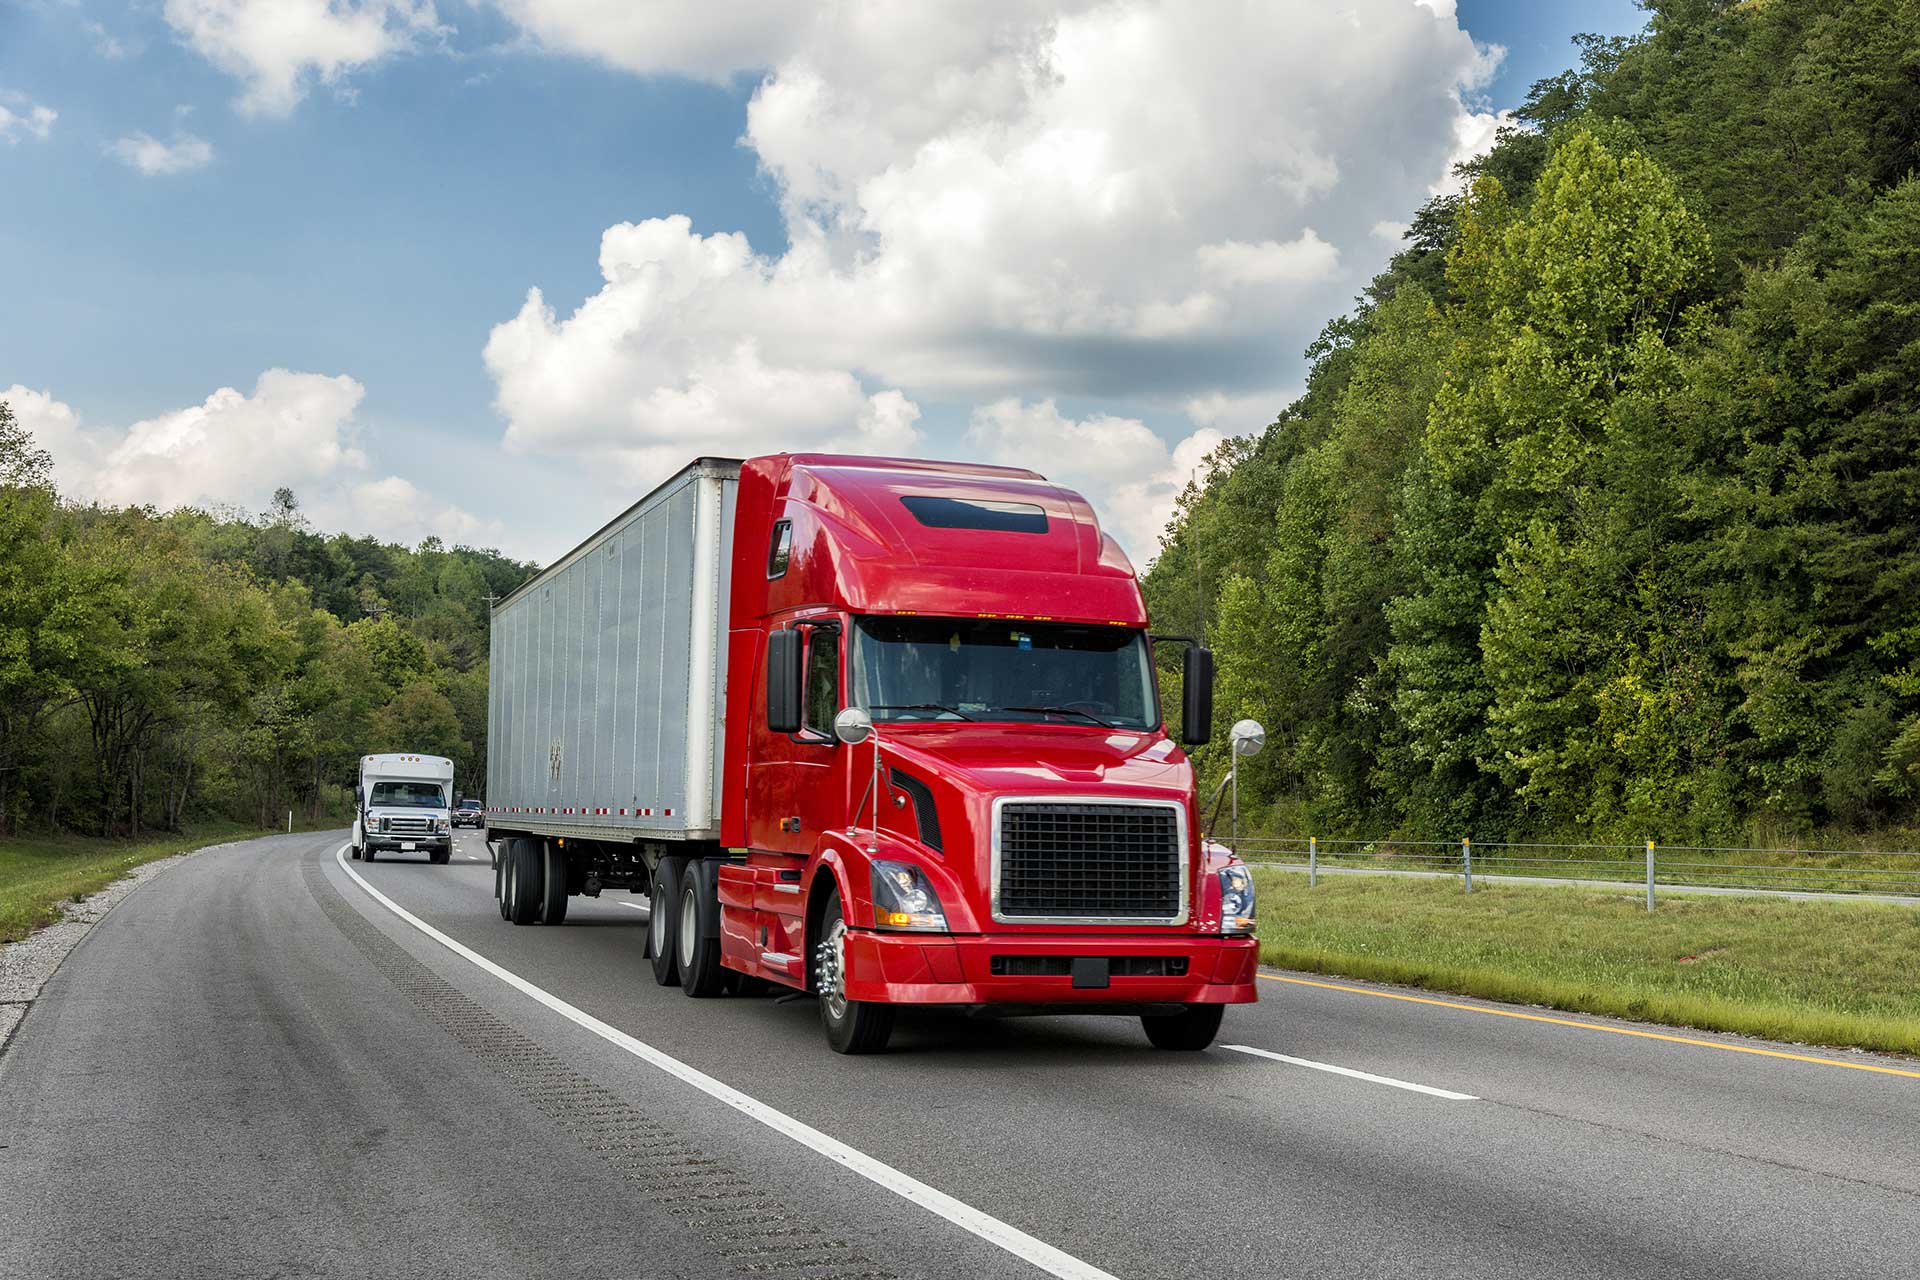 Rely on CT Corporation for the compliance expertise to help your trucking business succeed